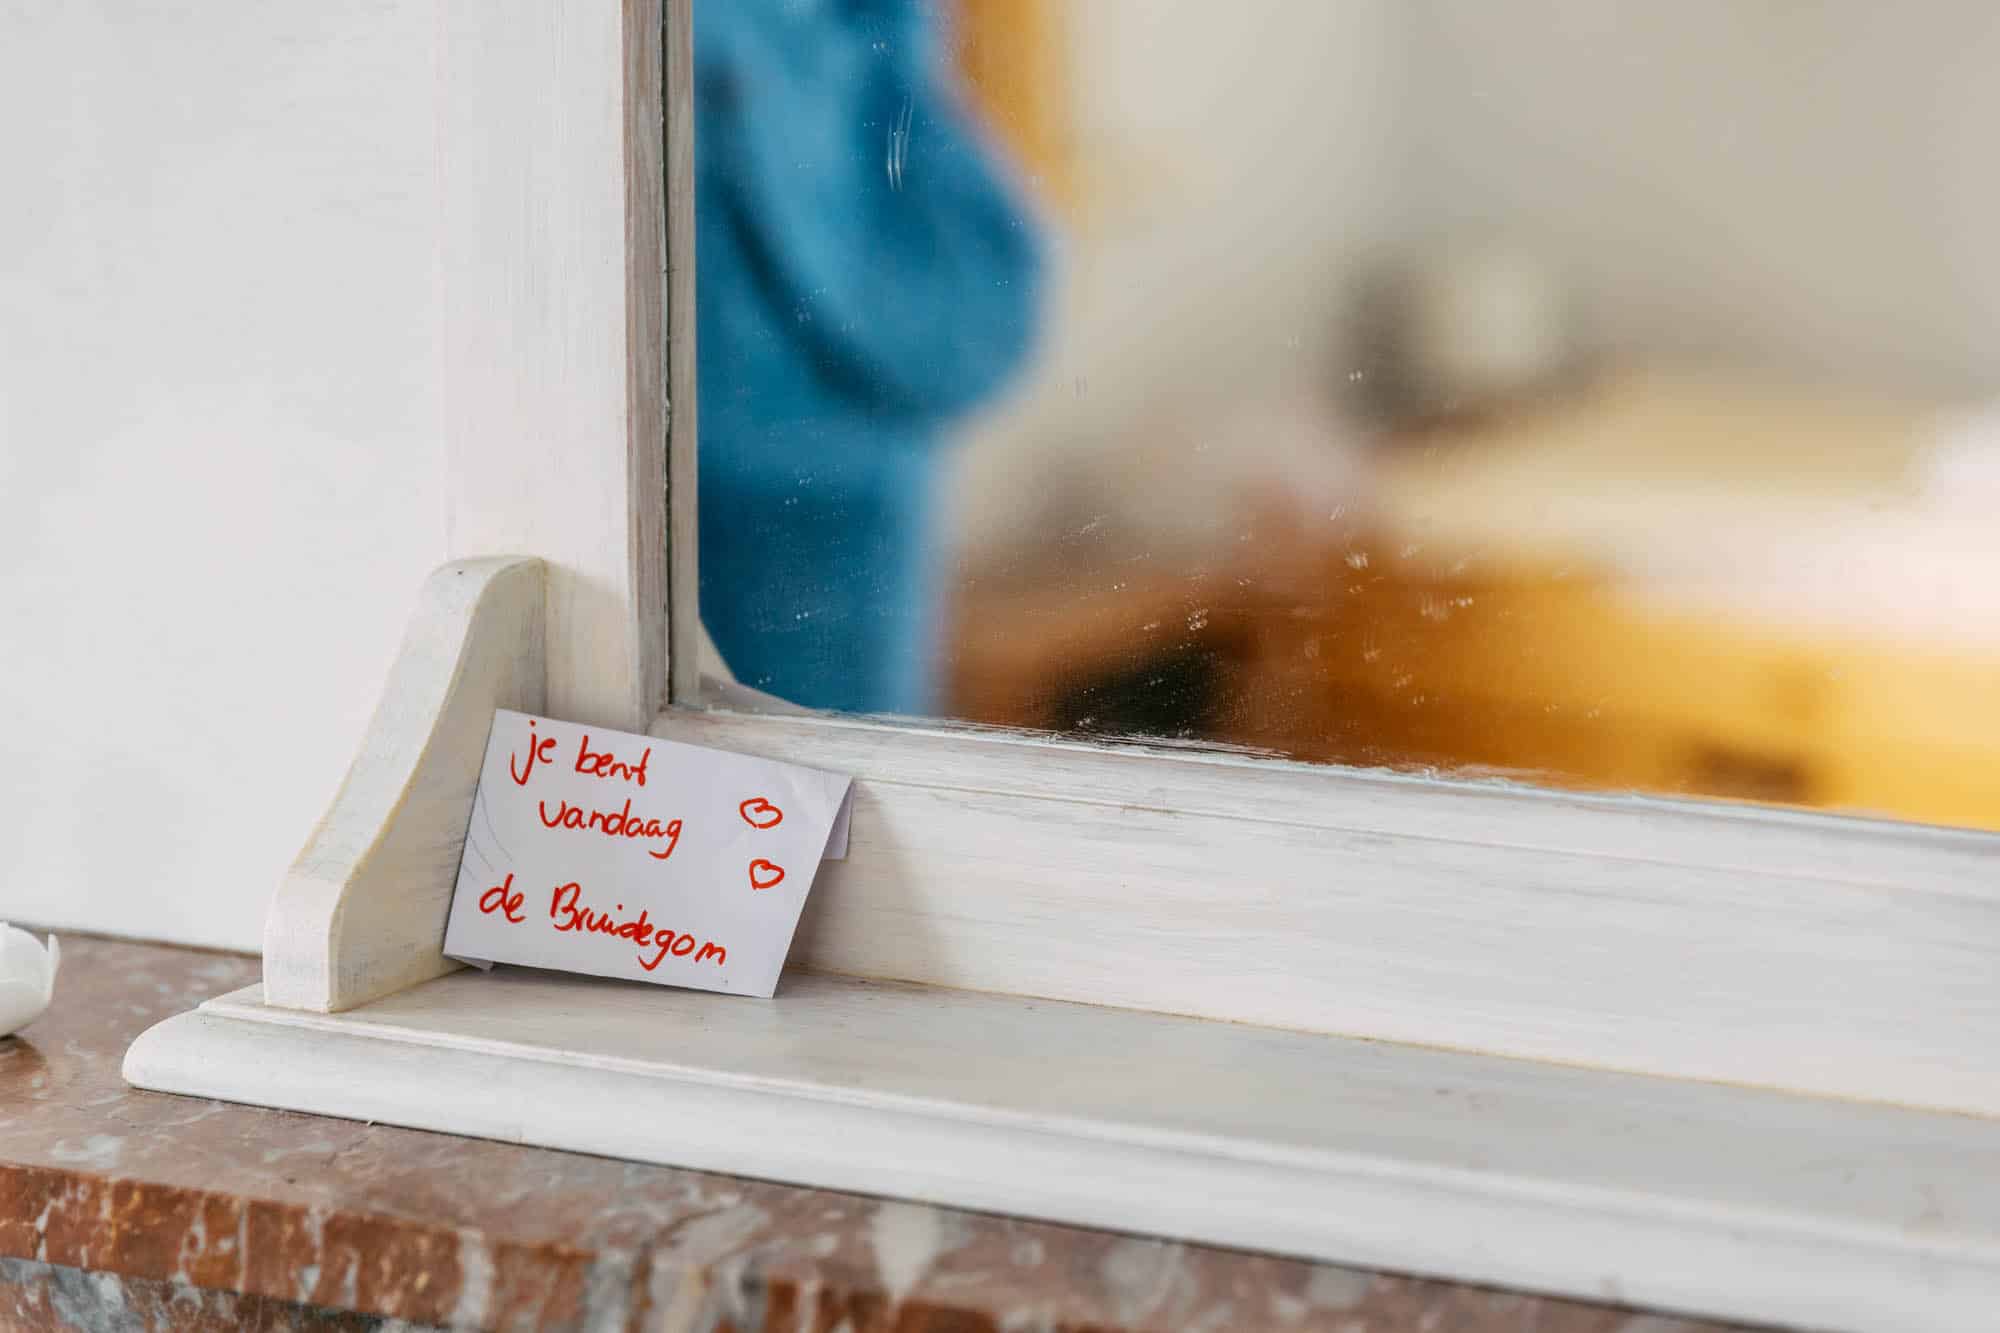 An engaged note on a mirror saying I love you.